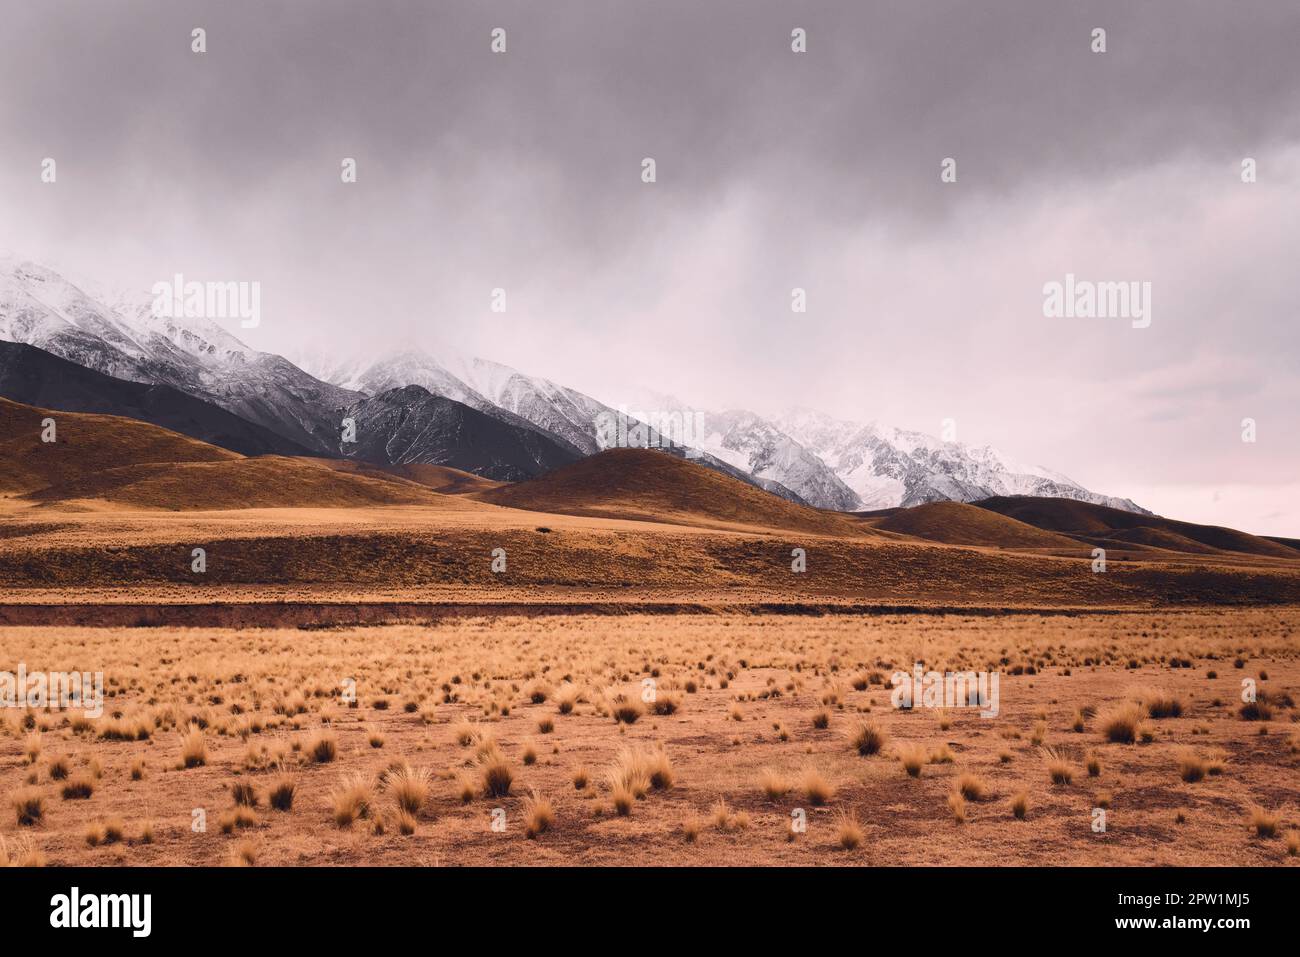 Dry grassland with rolling hills by the snowy Andes mountains in Valle de Uco, Mendoza, Argentina, in a dark cloudy day. Stock Photo